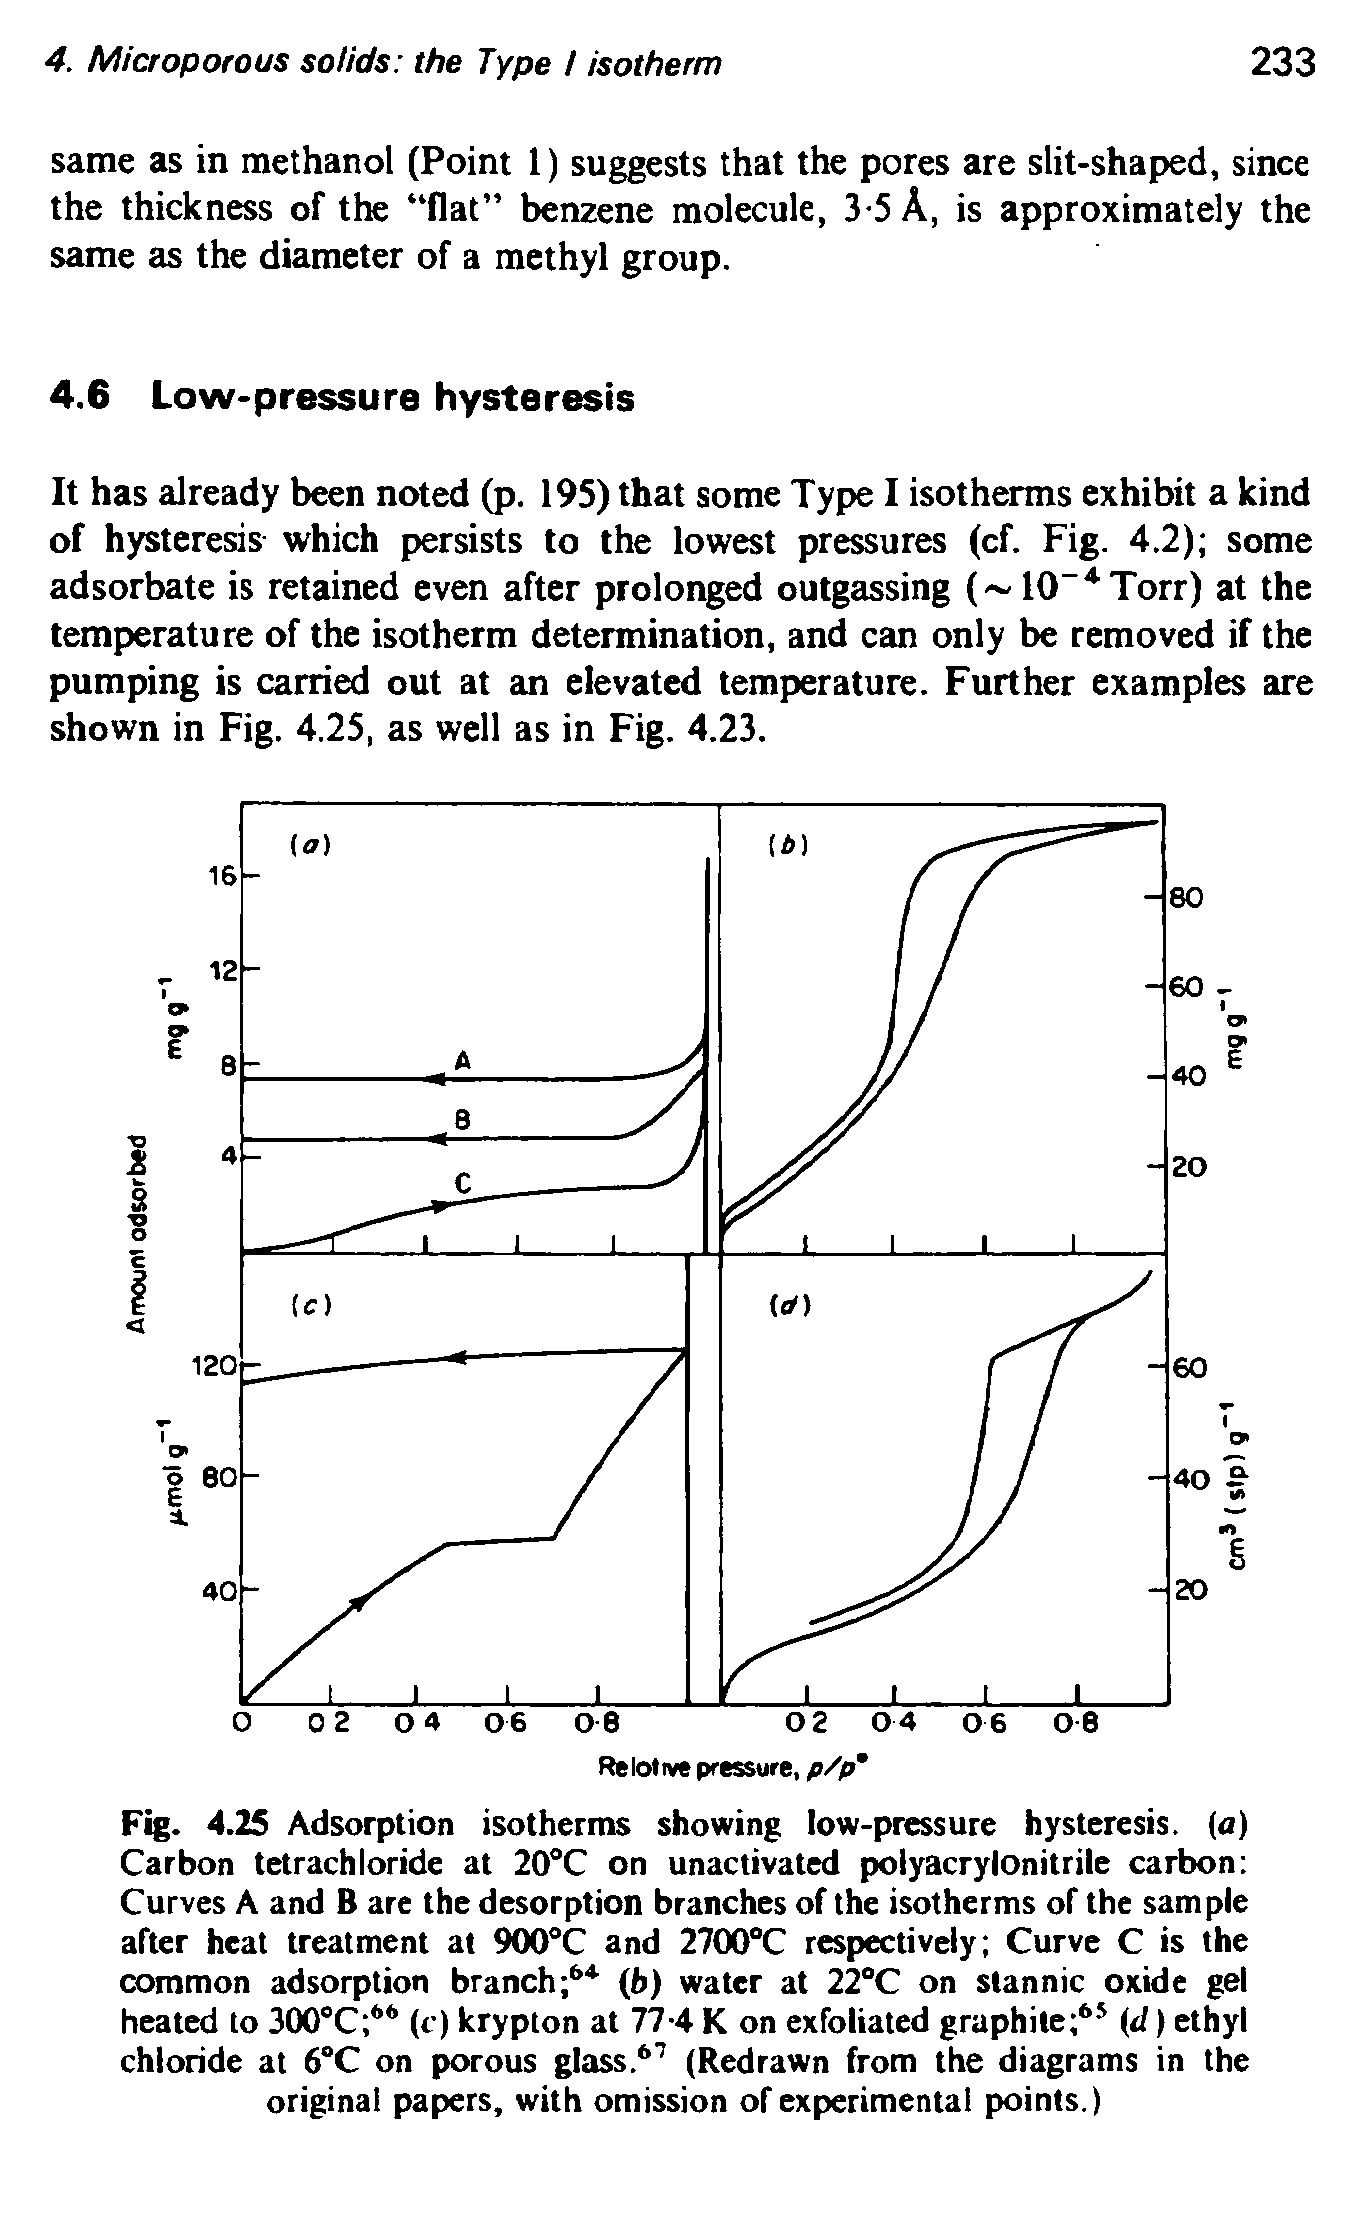 Fig. 4.25 Adsorption isotherms showing low-pressure hysteresis, (a) Carbon tetrachloride at 20°C on unactivated polyacrylonitrile carbon Curves A and B are the desorption branches of the isotherms of the sample after heat treatment at 900°C and 2700°C respectively Curve C is the common adsorption branch (b) water at 22°C on stannic oxide gel heated to SOO C (c) krypton at 77-4 K on exfoliated graphite (d) ethyl chloride at 6°C on porous glass. (Redrawn from the diagrams in the original papers, with omission of experimental points.)...